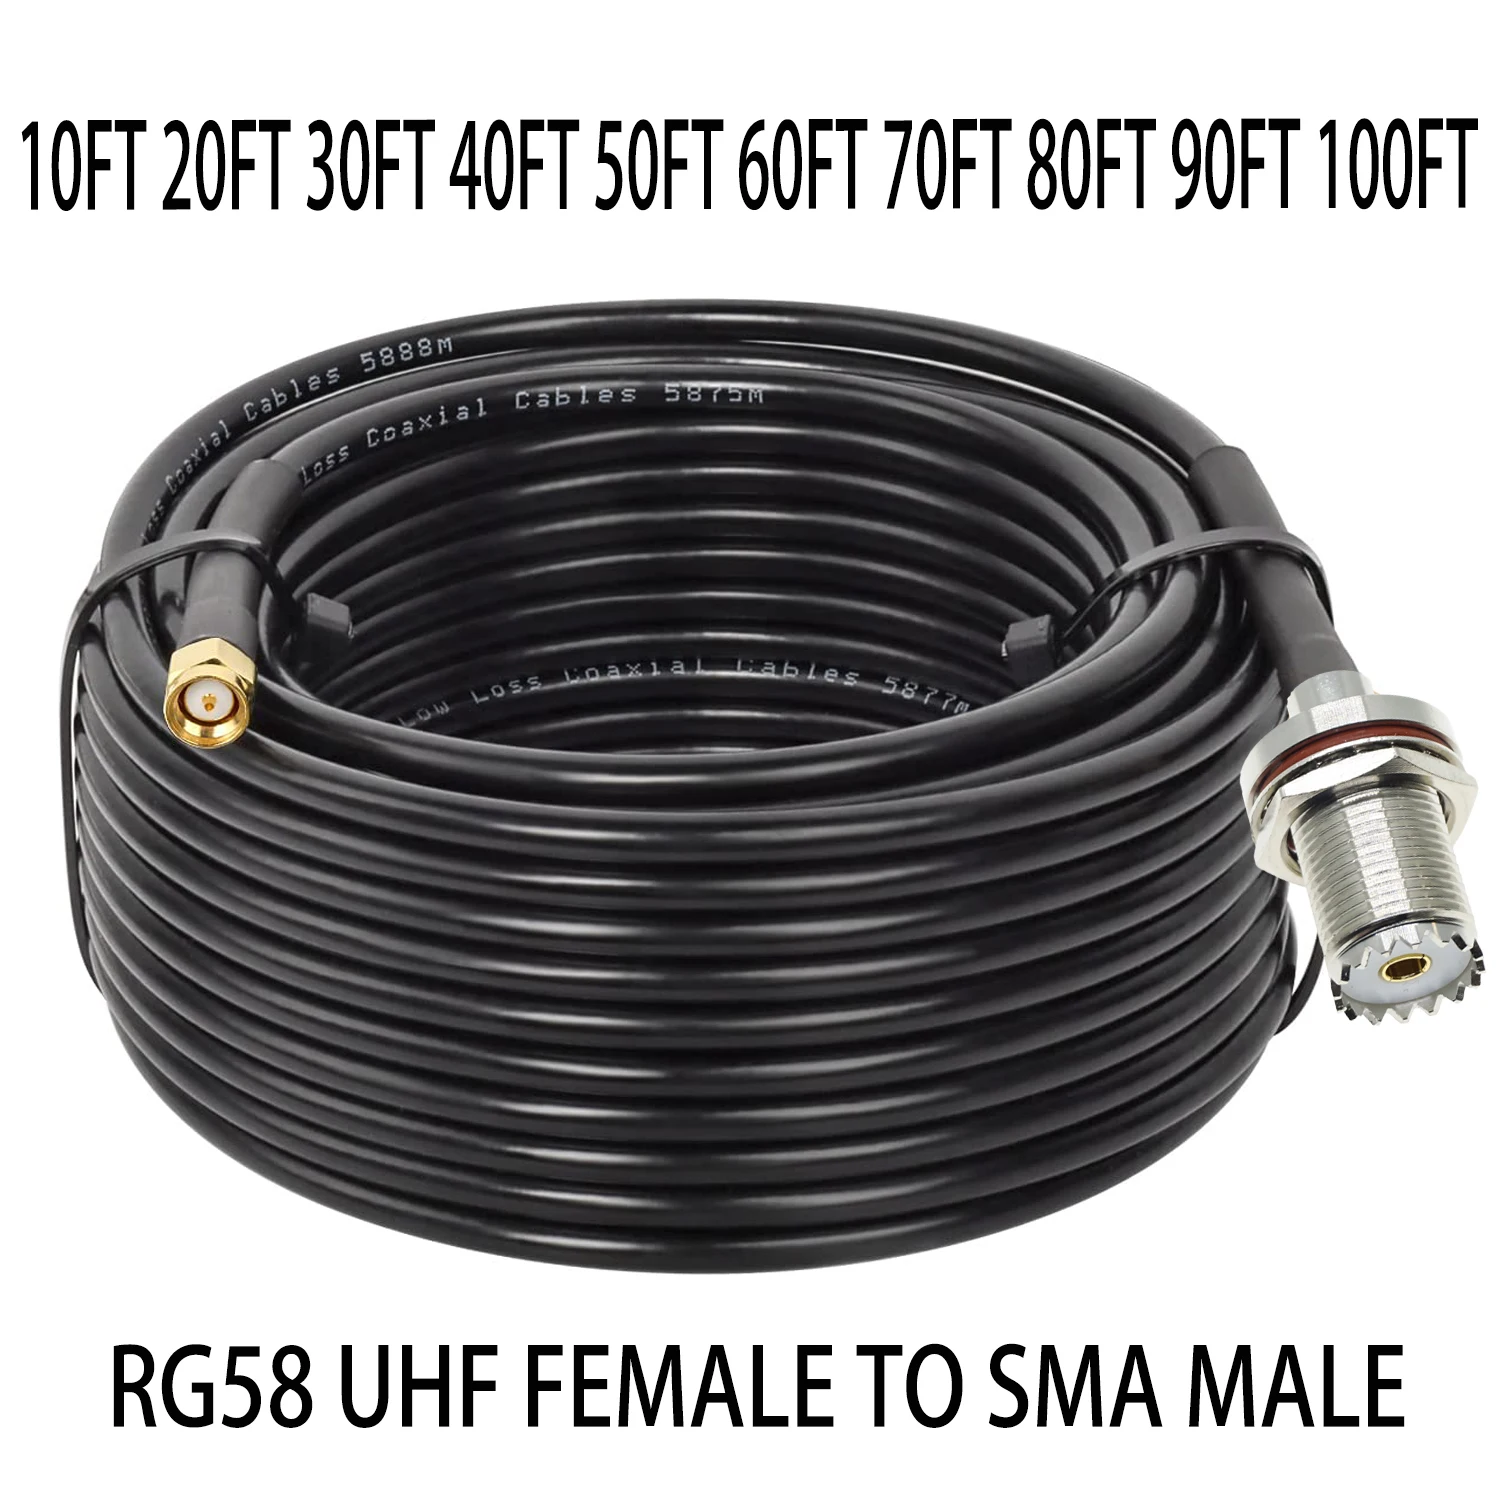 50ft 100feet RG58 UHF female SO239 To SMA male plug connector ham CB radio antenna RF pigtail coax coaxial Cable jumper 50ohm